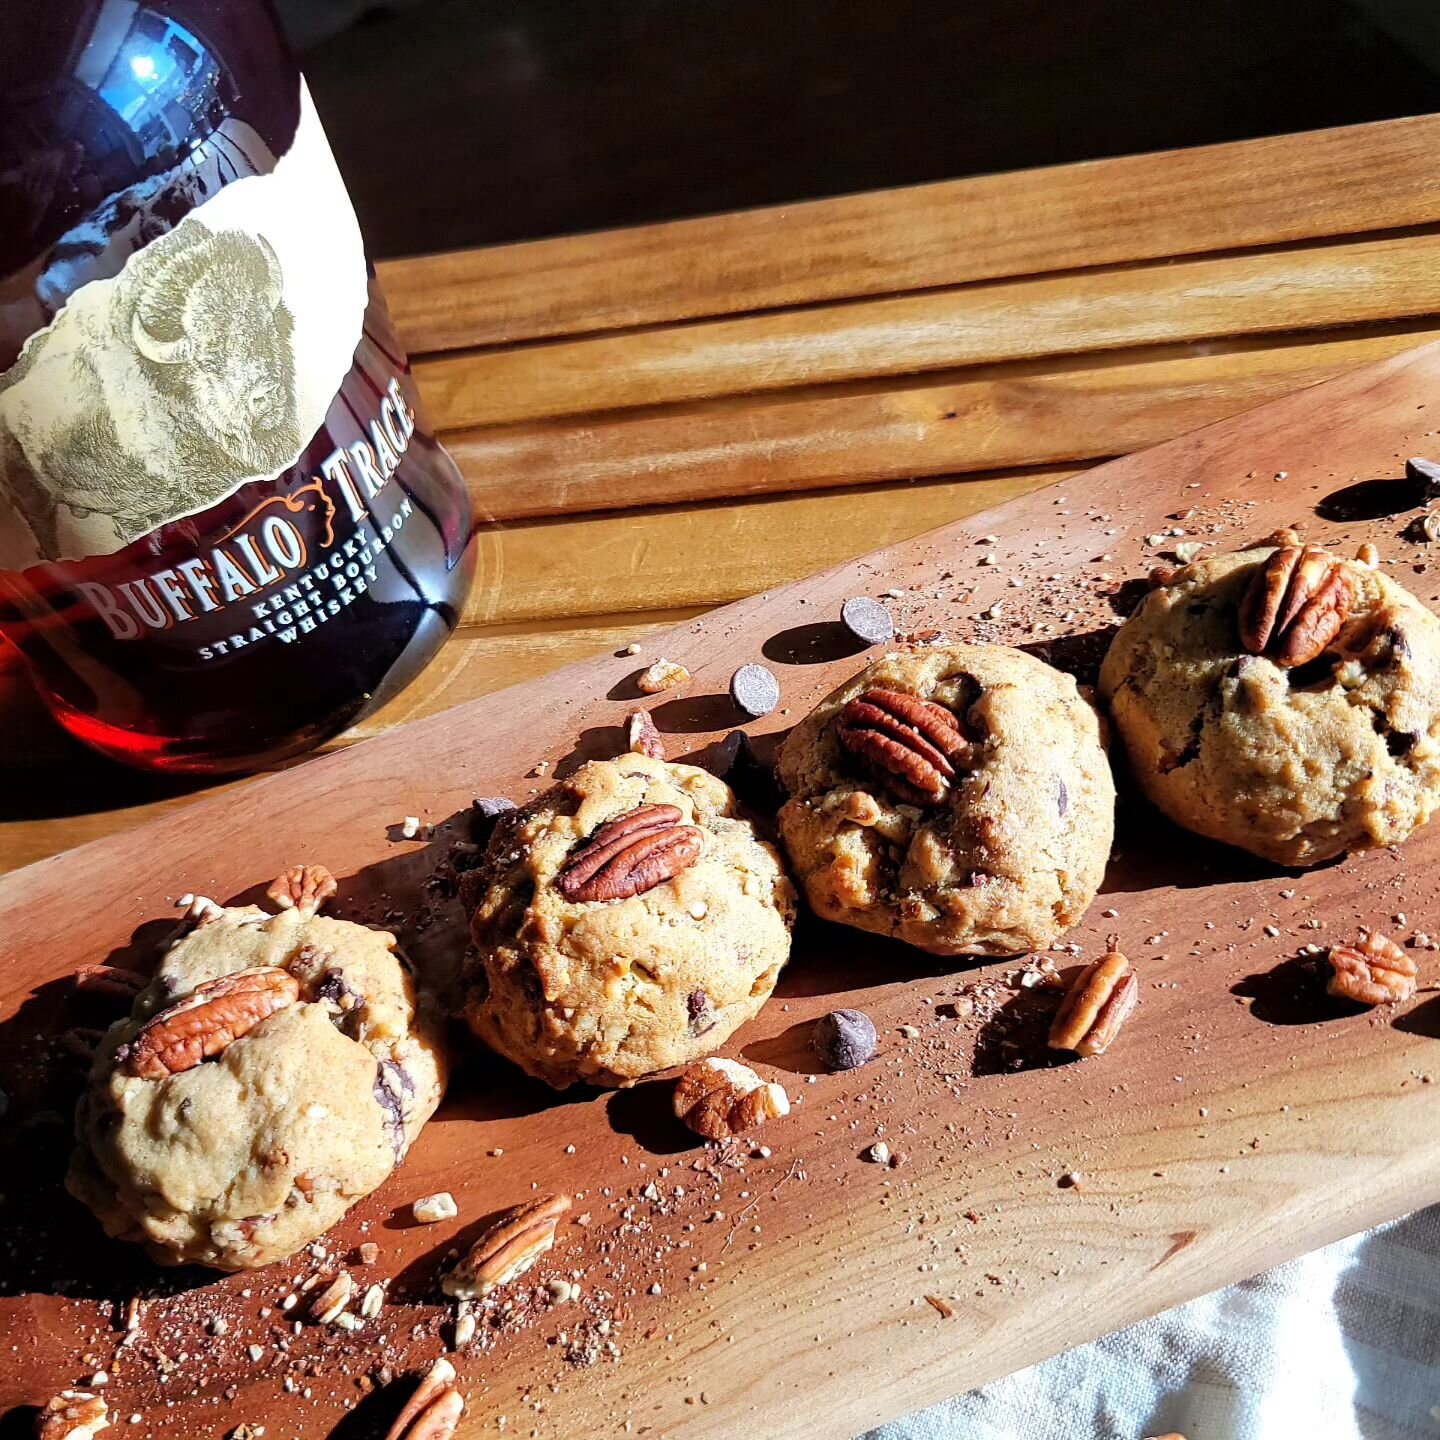 🌰Brown Butter Bourbon Pecan Chocolate Chip Cookies🌰 

This is such an indulgent cookie! There are so many layers of deliciousness!! Hints of cinnamon, Buffalo Trace Bourbon, Browned Butter, Buttered Pecans, and Dark Chocolate Chunks! It's a WINNER 